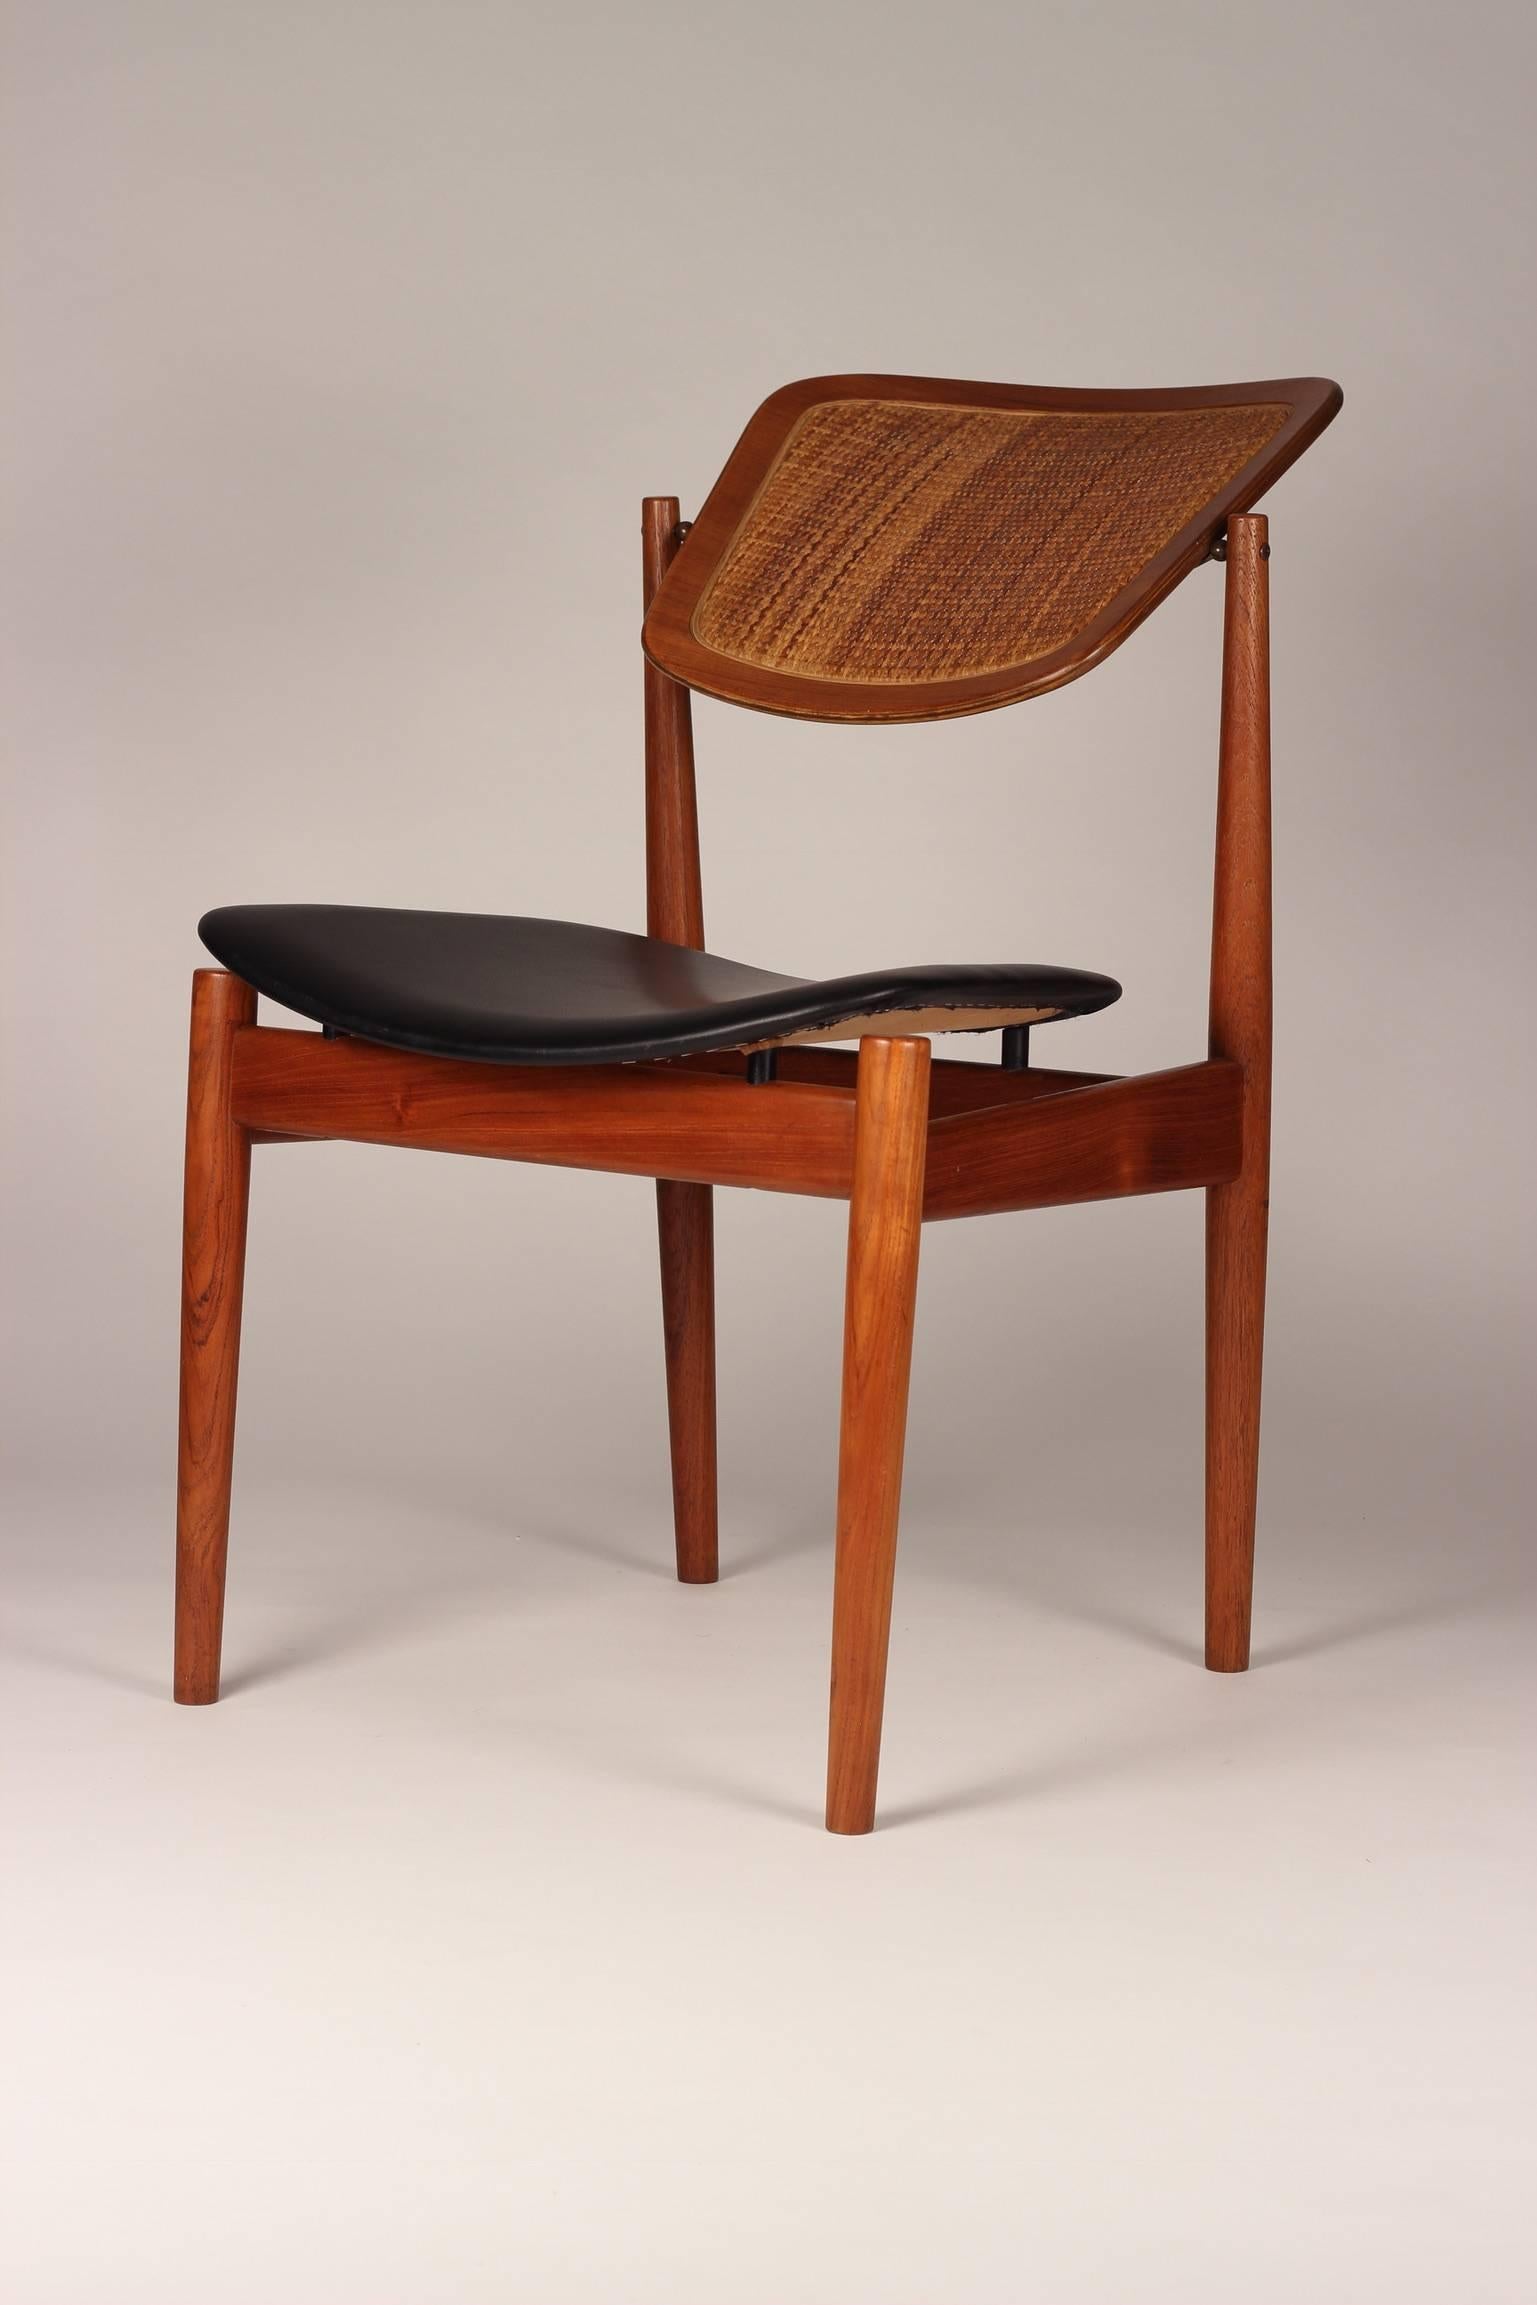 Danish Desk Chair by Arne Vodder in Teak, Cane and Black Leather 3